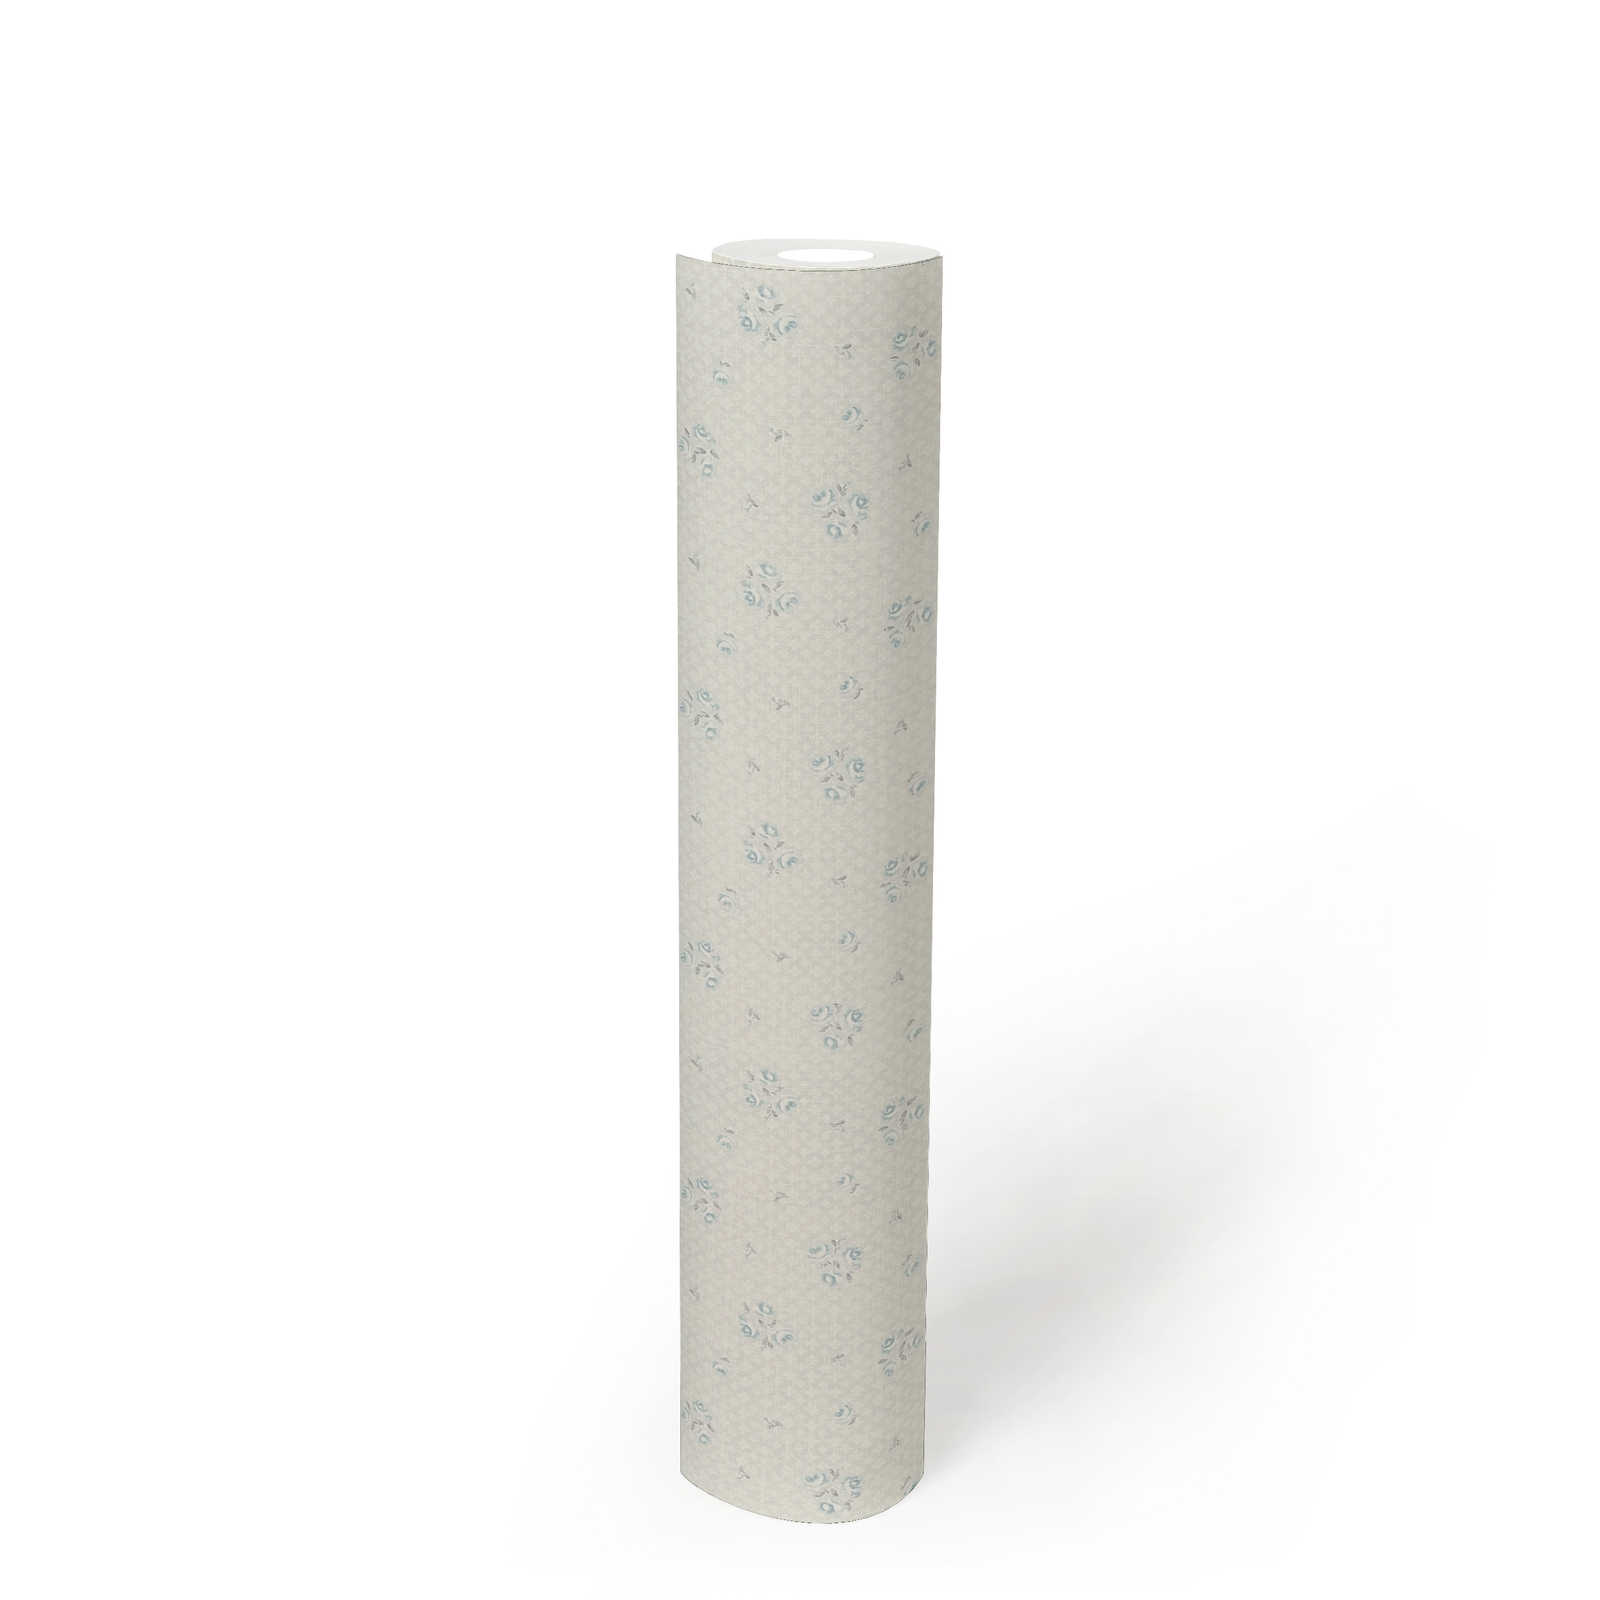             Country house wallpaper with floral pattern in Shabby Chic style - light grey, blue, white
        